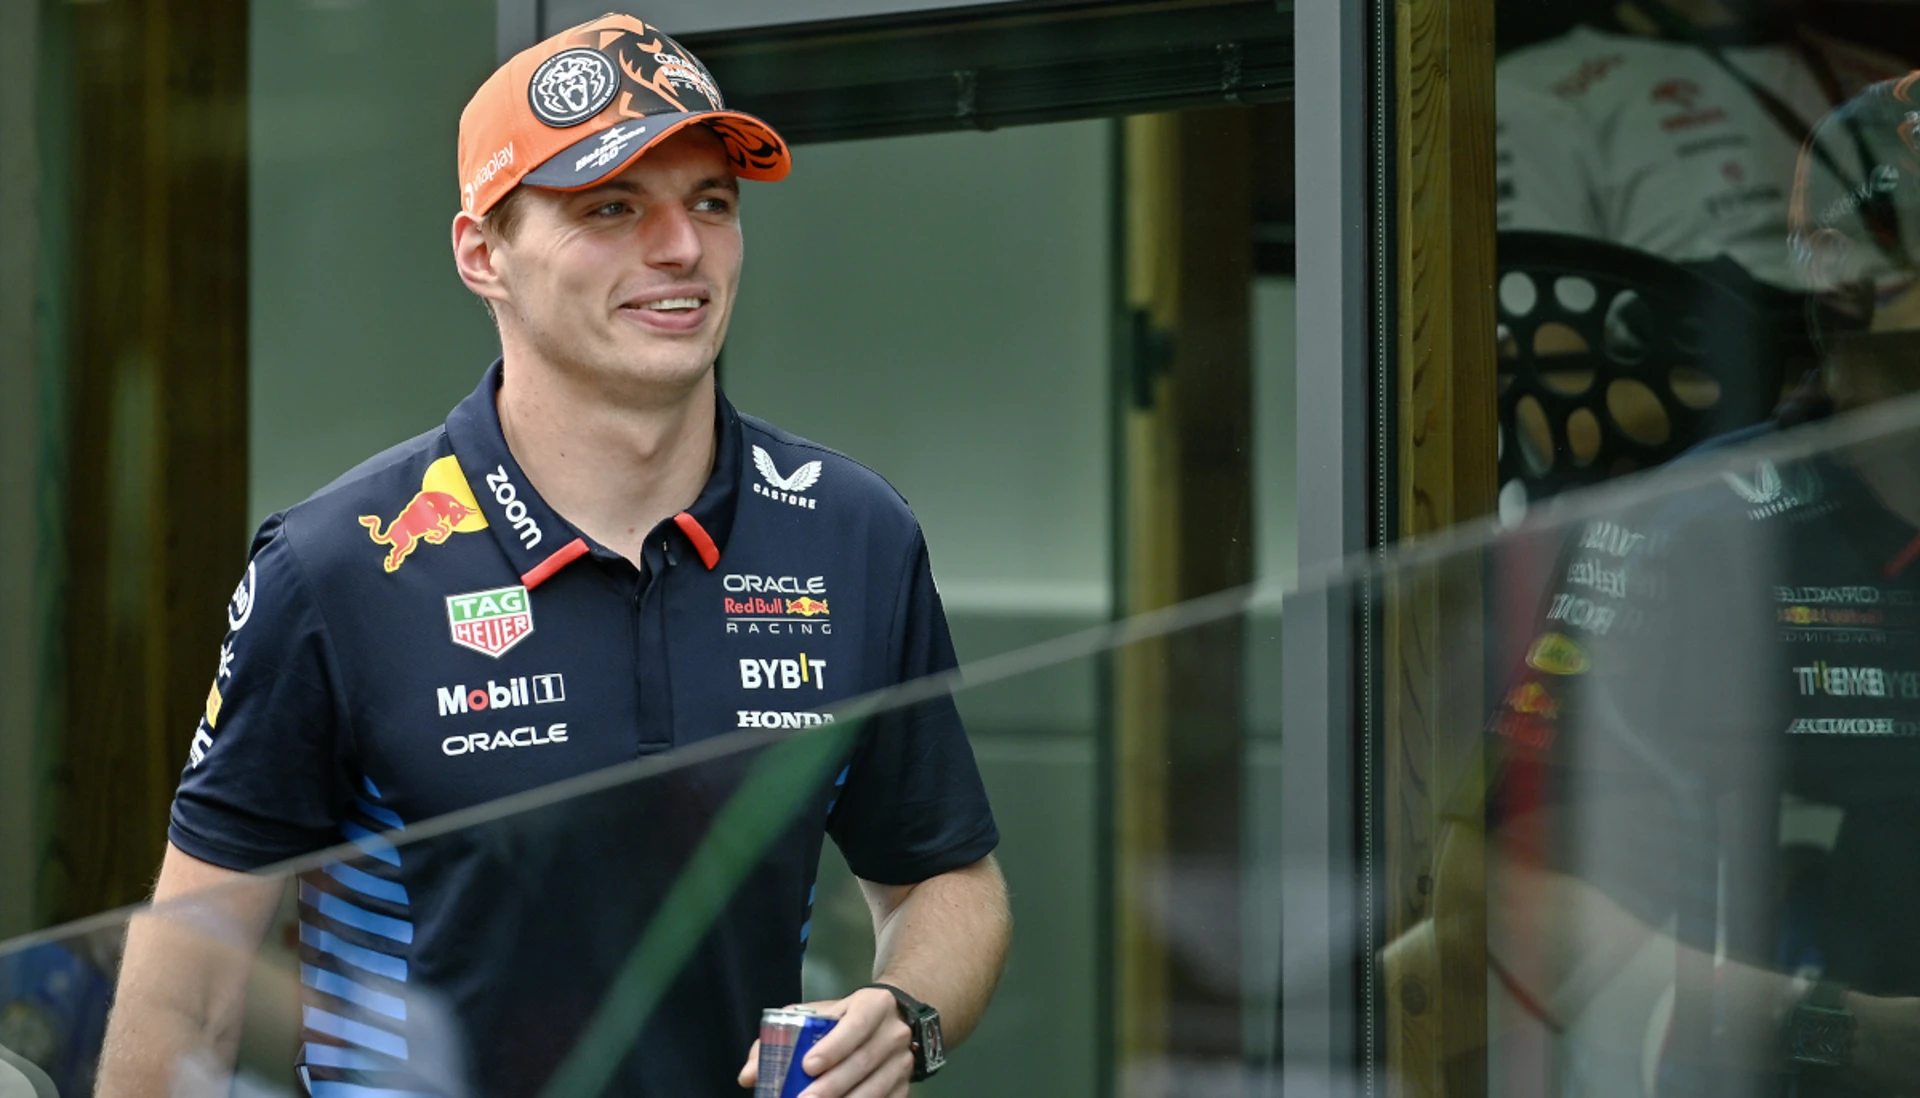 Verstappen to stick to 'vocal' style after Hungarian Grand Prix fall-out